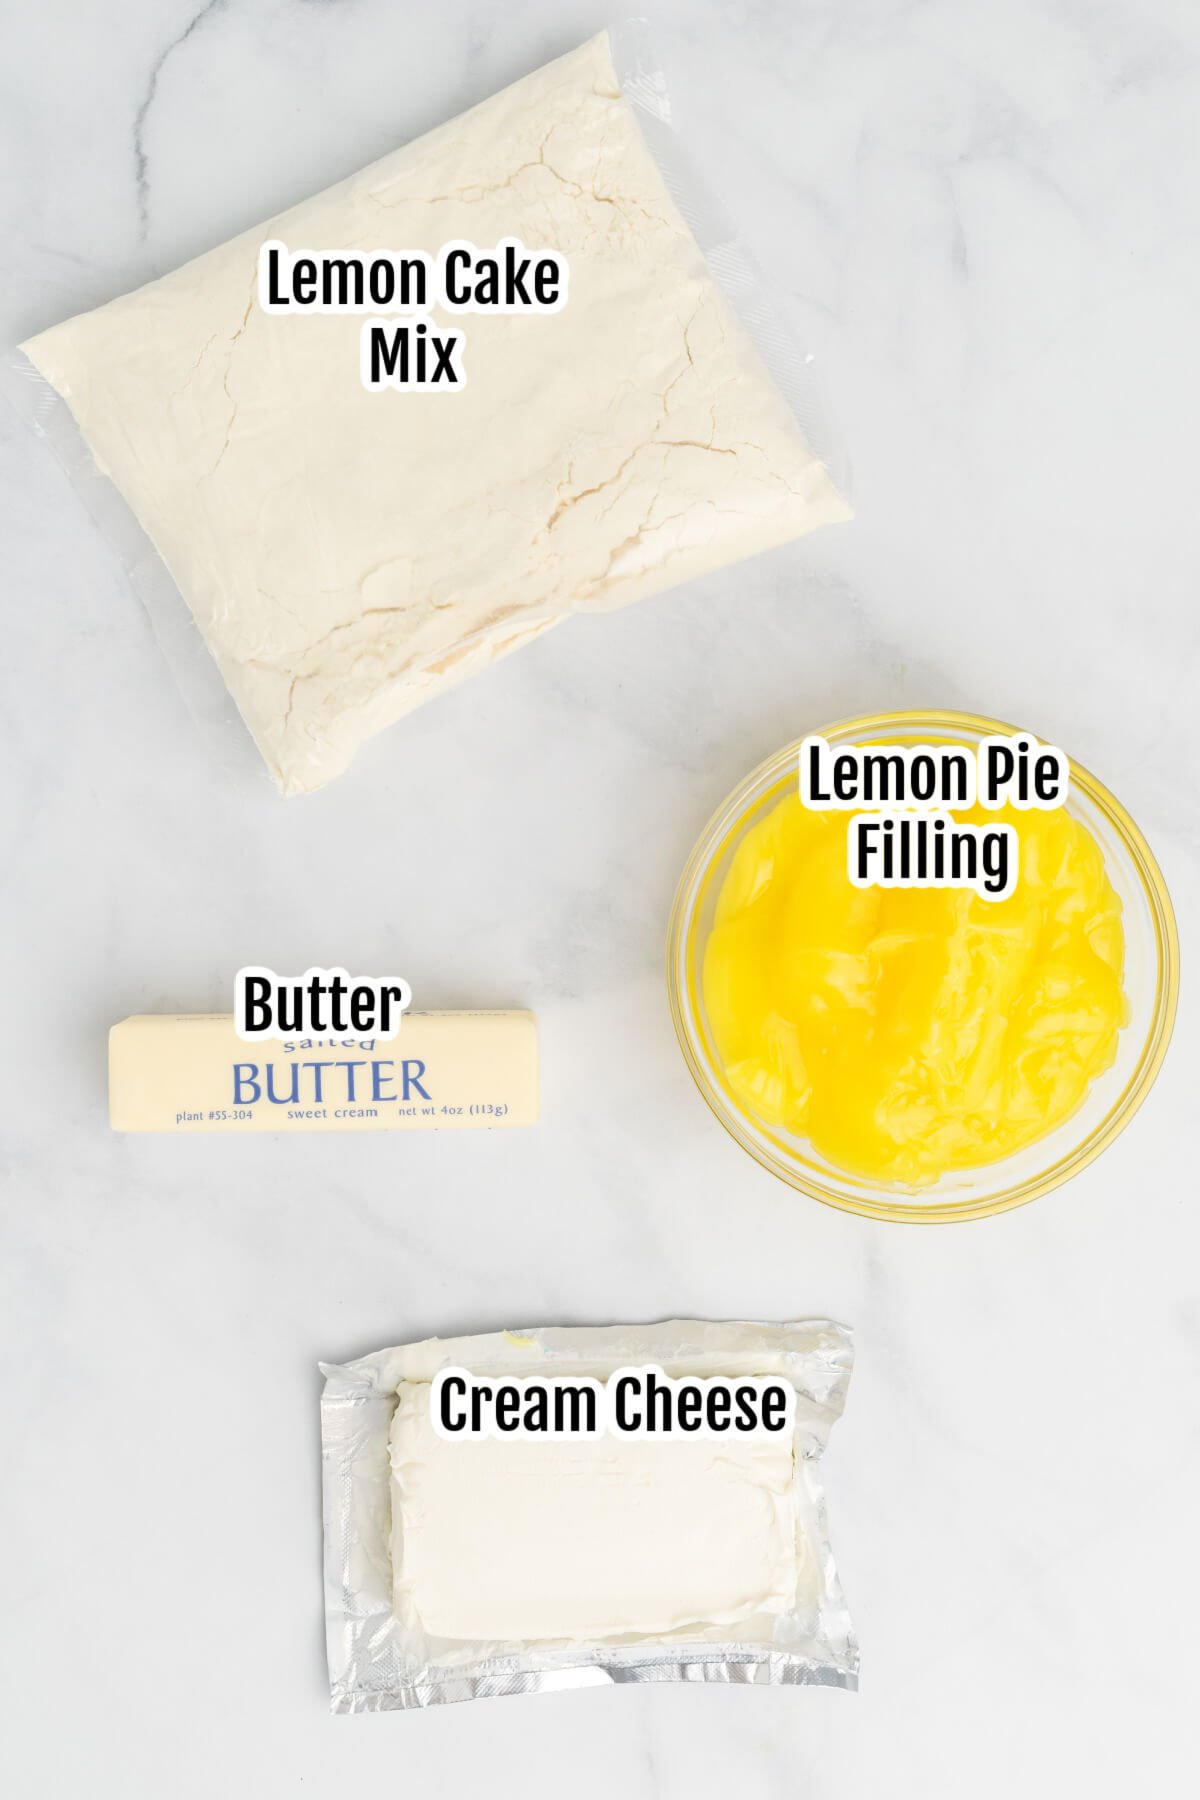 Image of the ingredients required for making the Lemon Dump Cake Recipe.